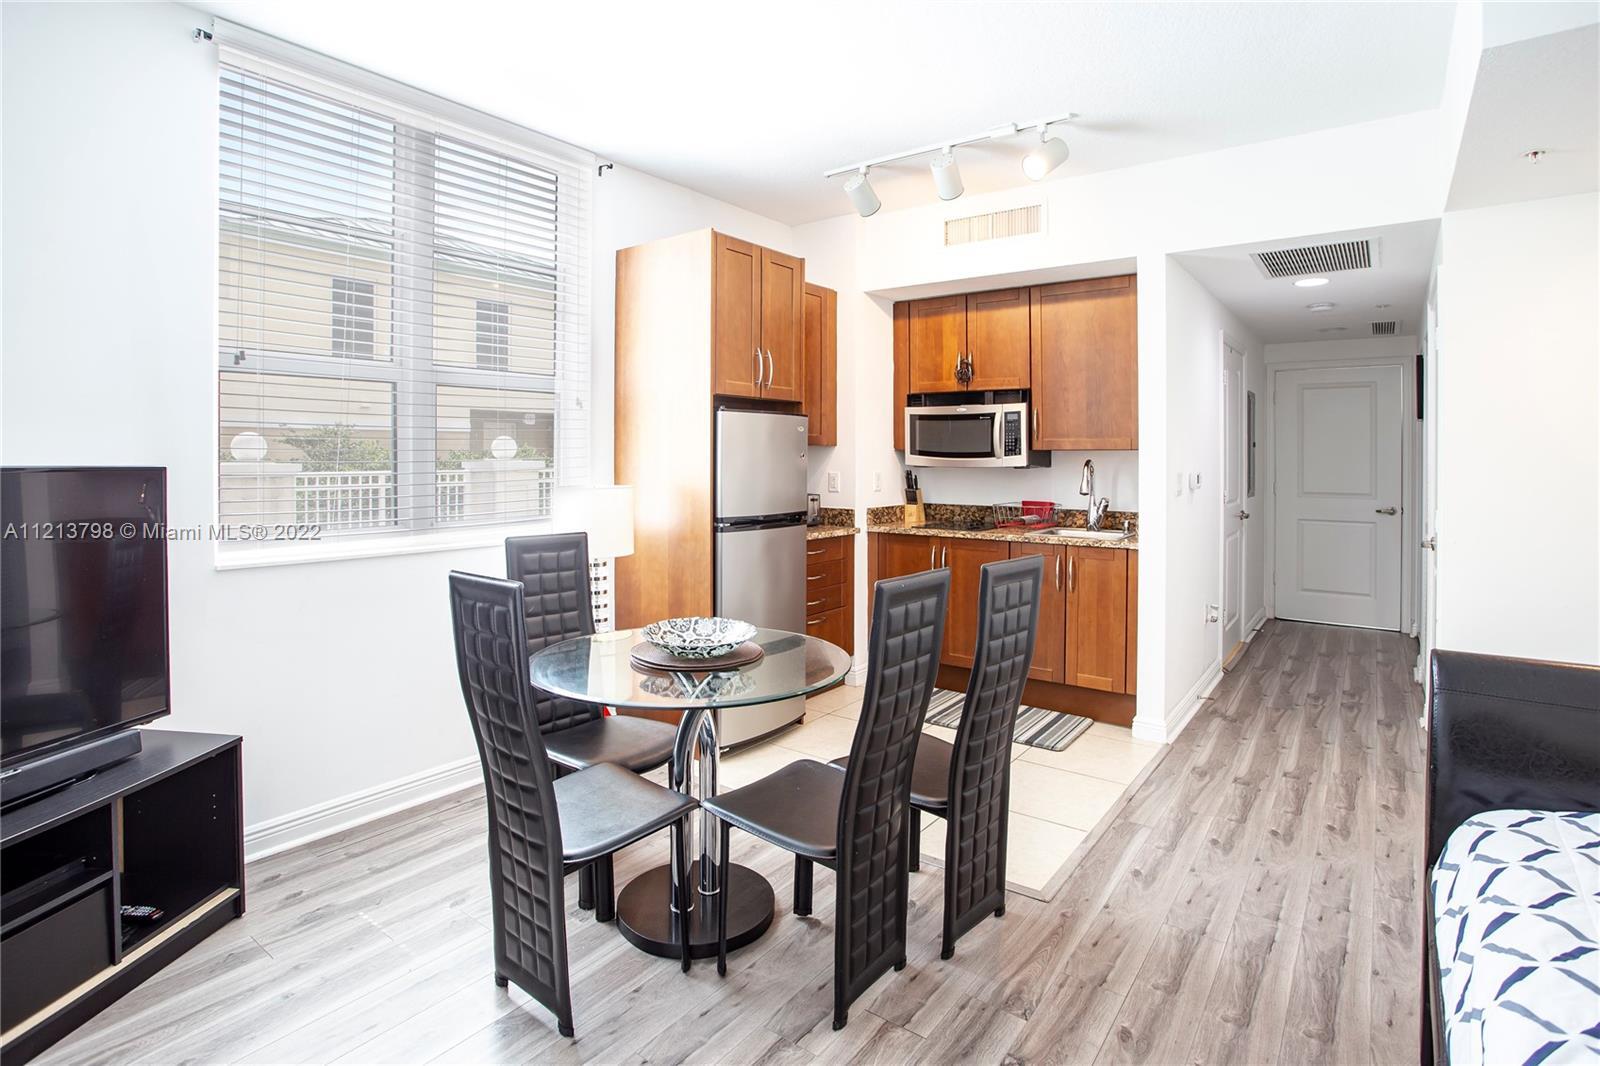 Stunning Income Producing One Bedroom Apartment in the most desired area in South Florida. Daily ren